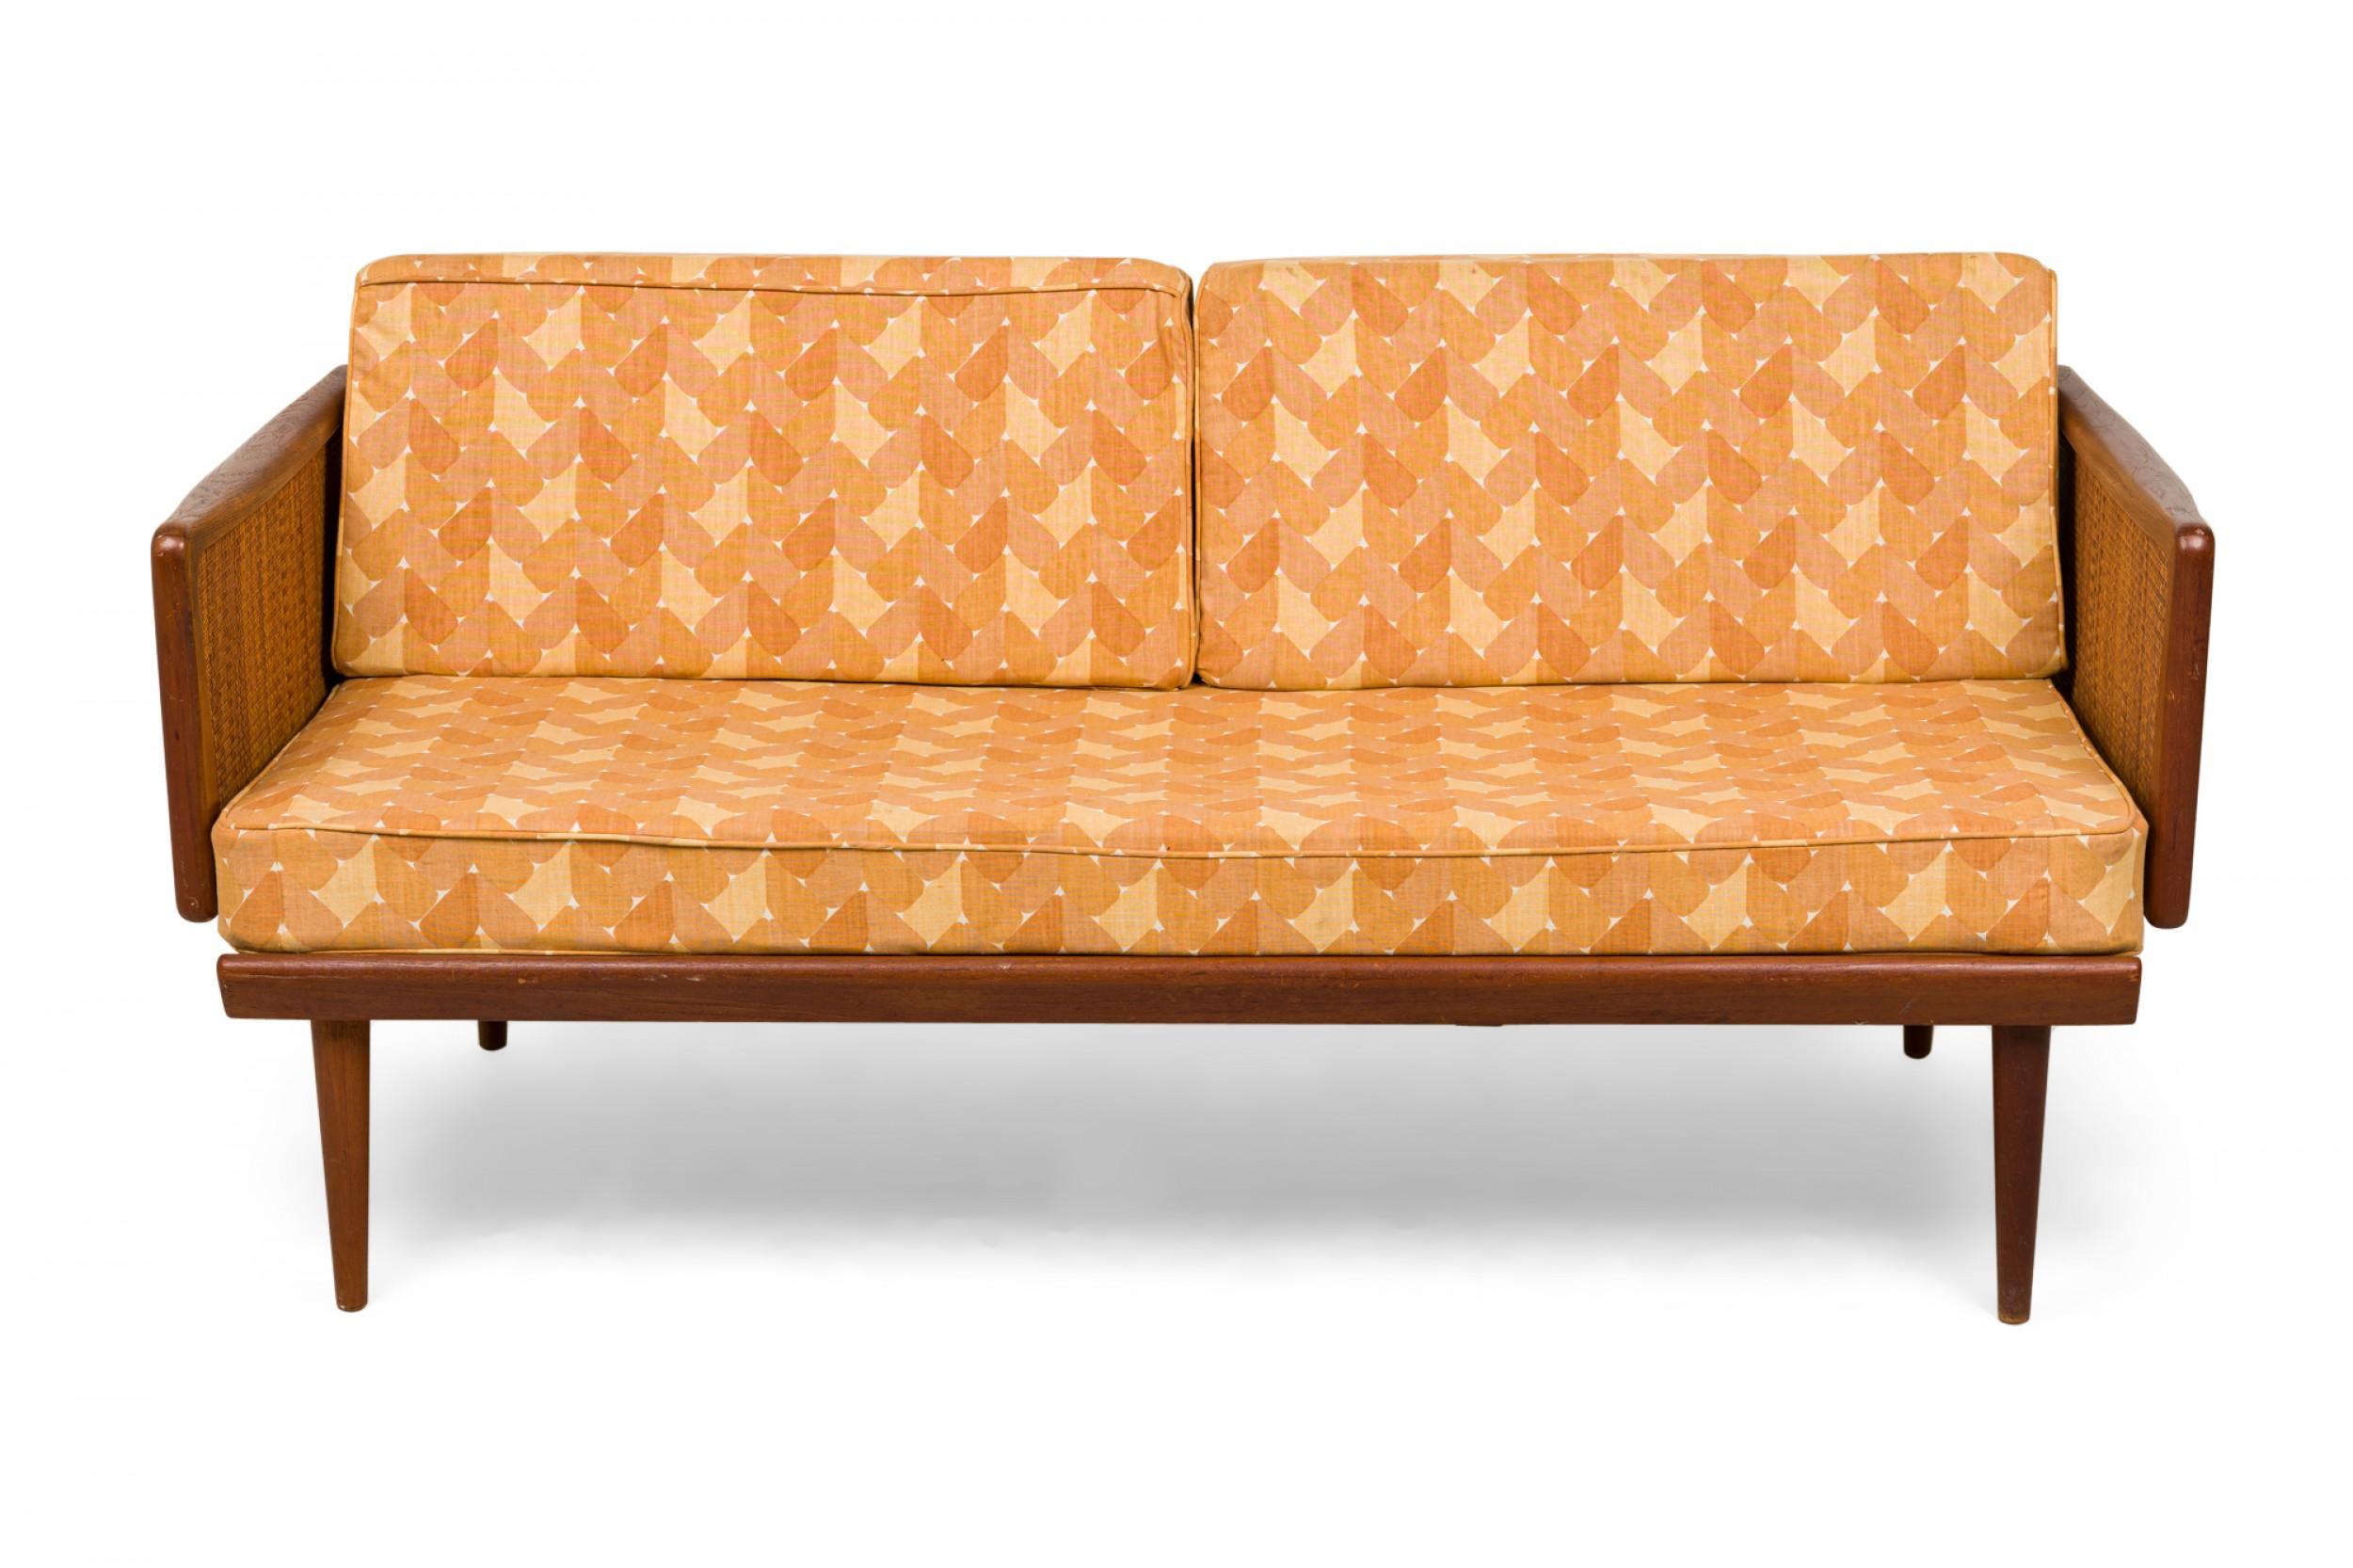 Danish Mid-Century expandable sleeper settee with a teak wood frame with caned sides, a solid seat cushion and two wedge-shaped removable back cushions in light and dark gold patterned upholstery, with hinged arms that fold down to create and